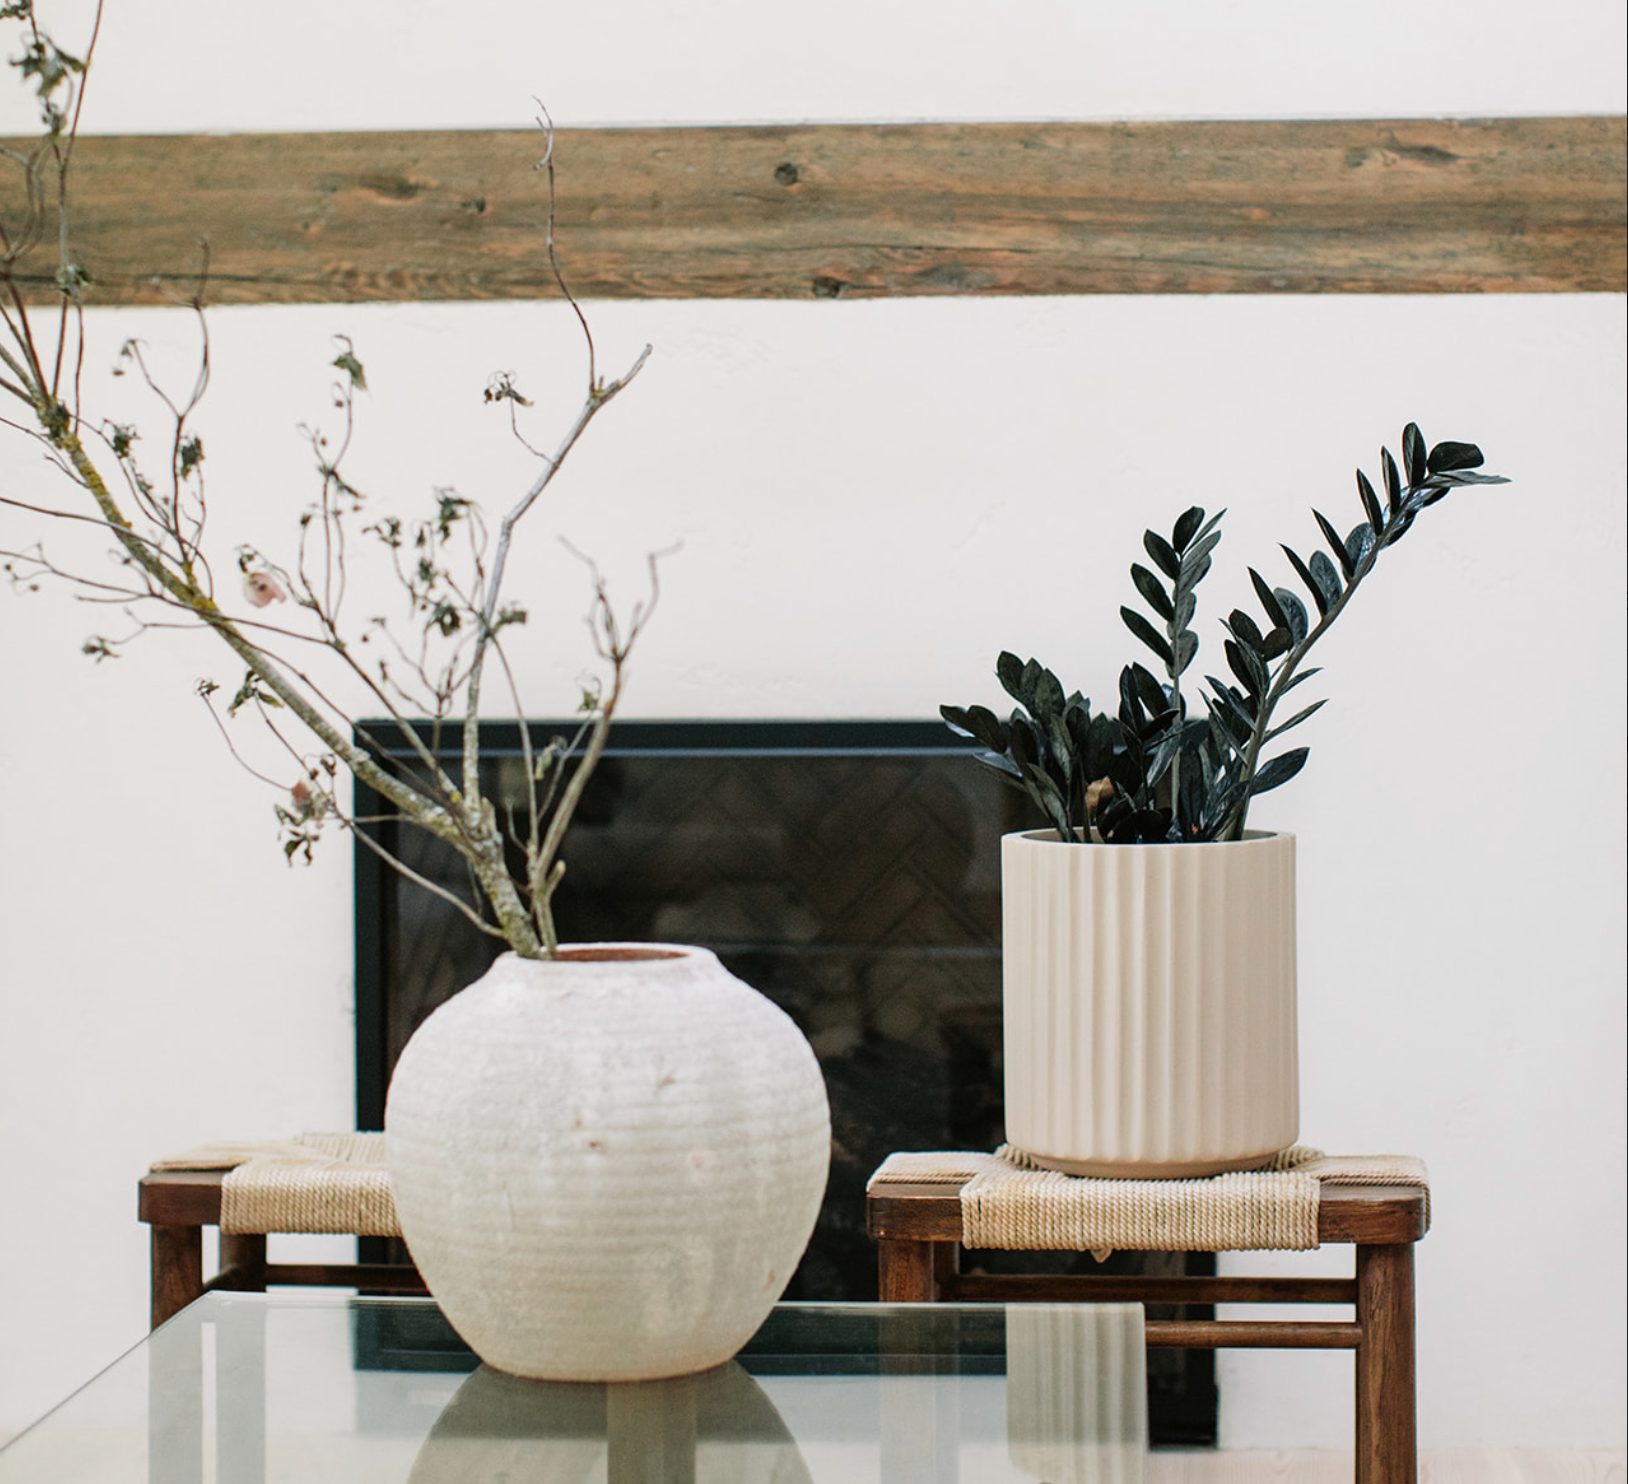 Wooden stool and coffee table with two nude vases, zz plant placed in one.